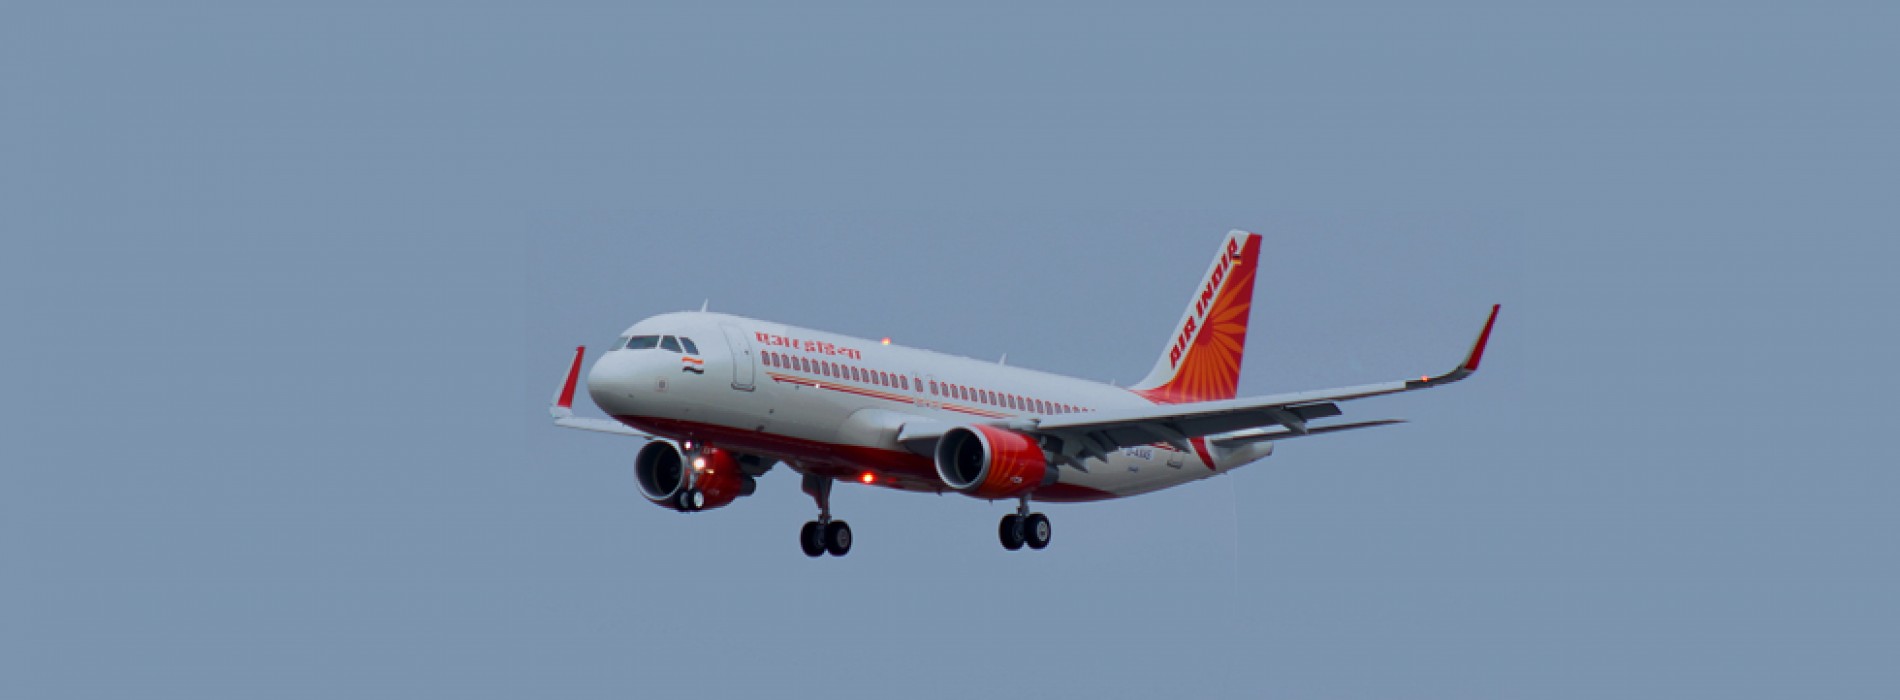 Air India is in profit, says Jayant Sinha